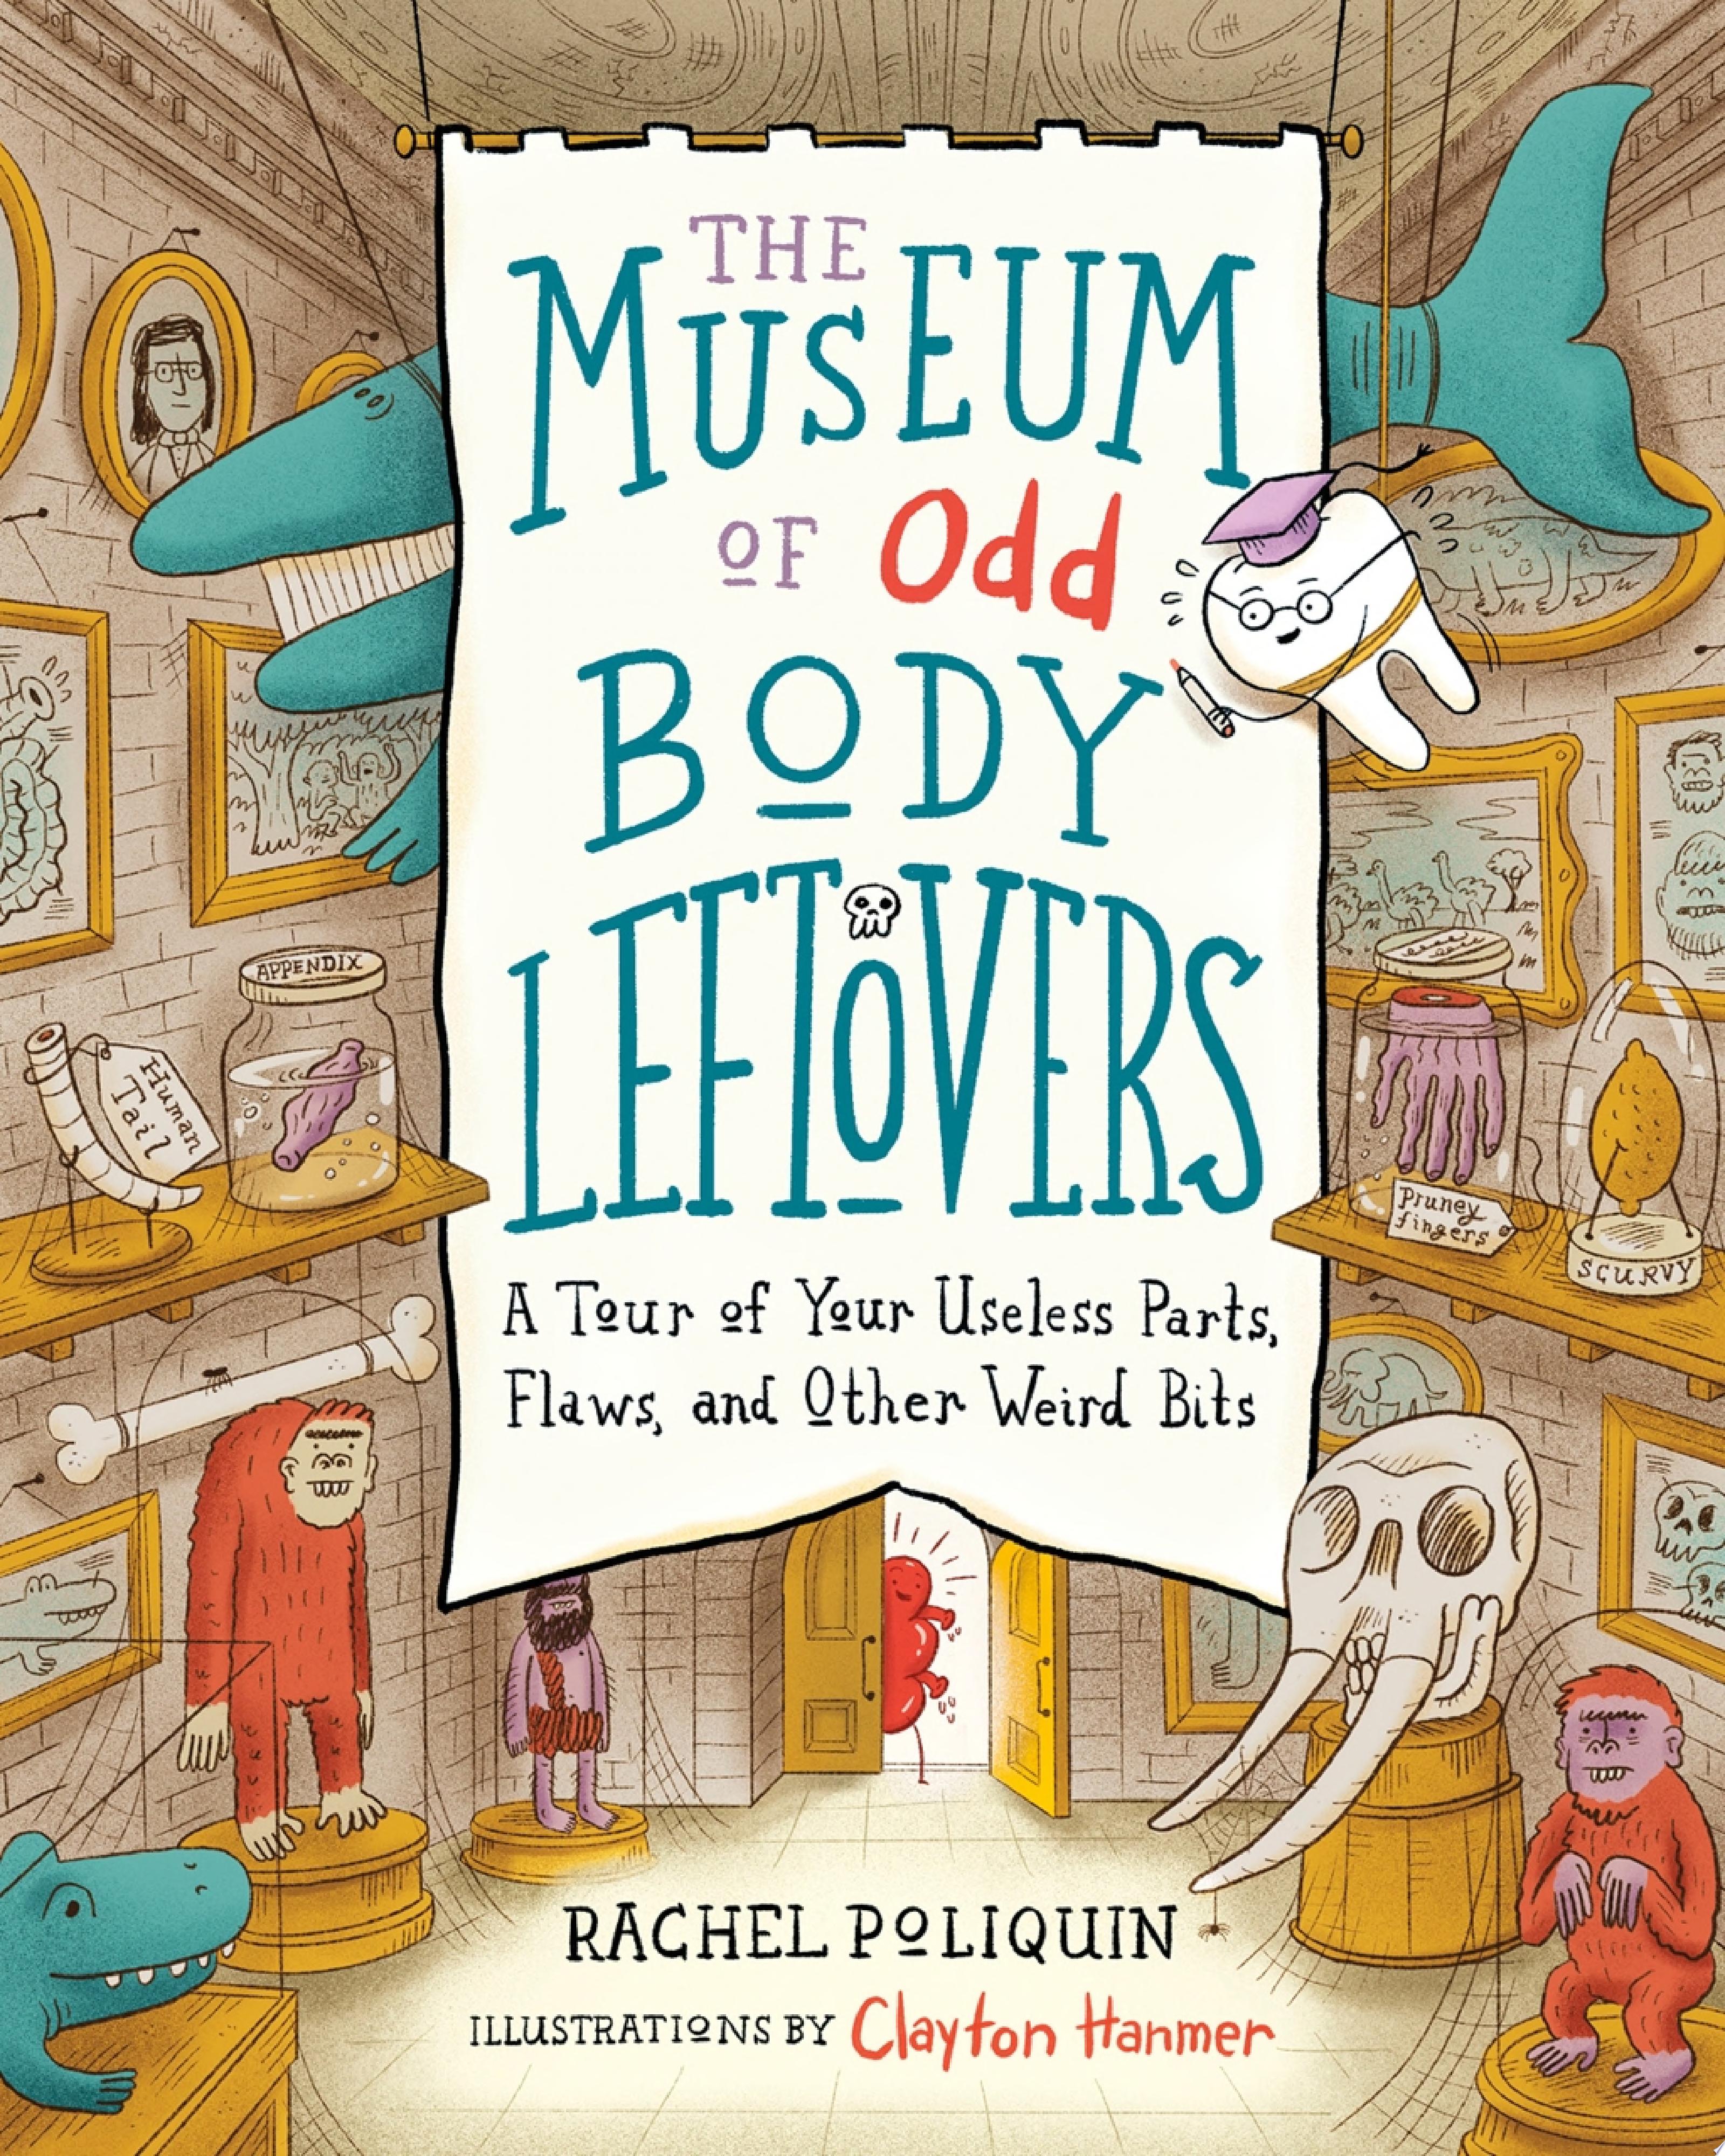 Image for "The Museum of Odd Body Leftovers"